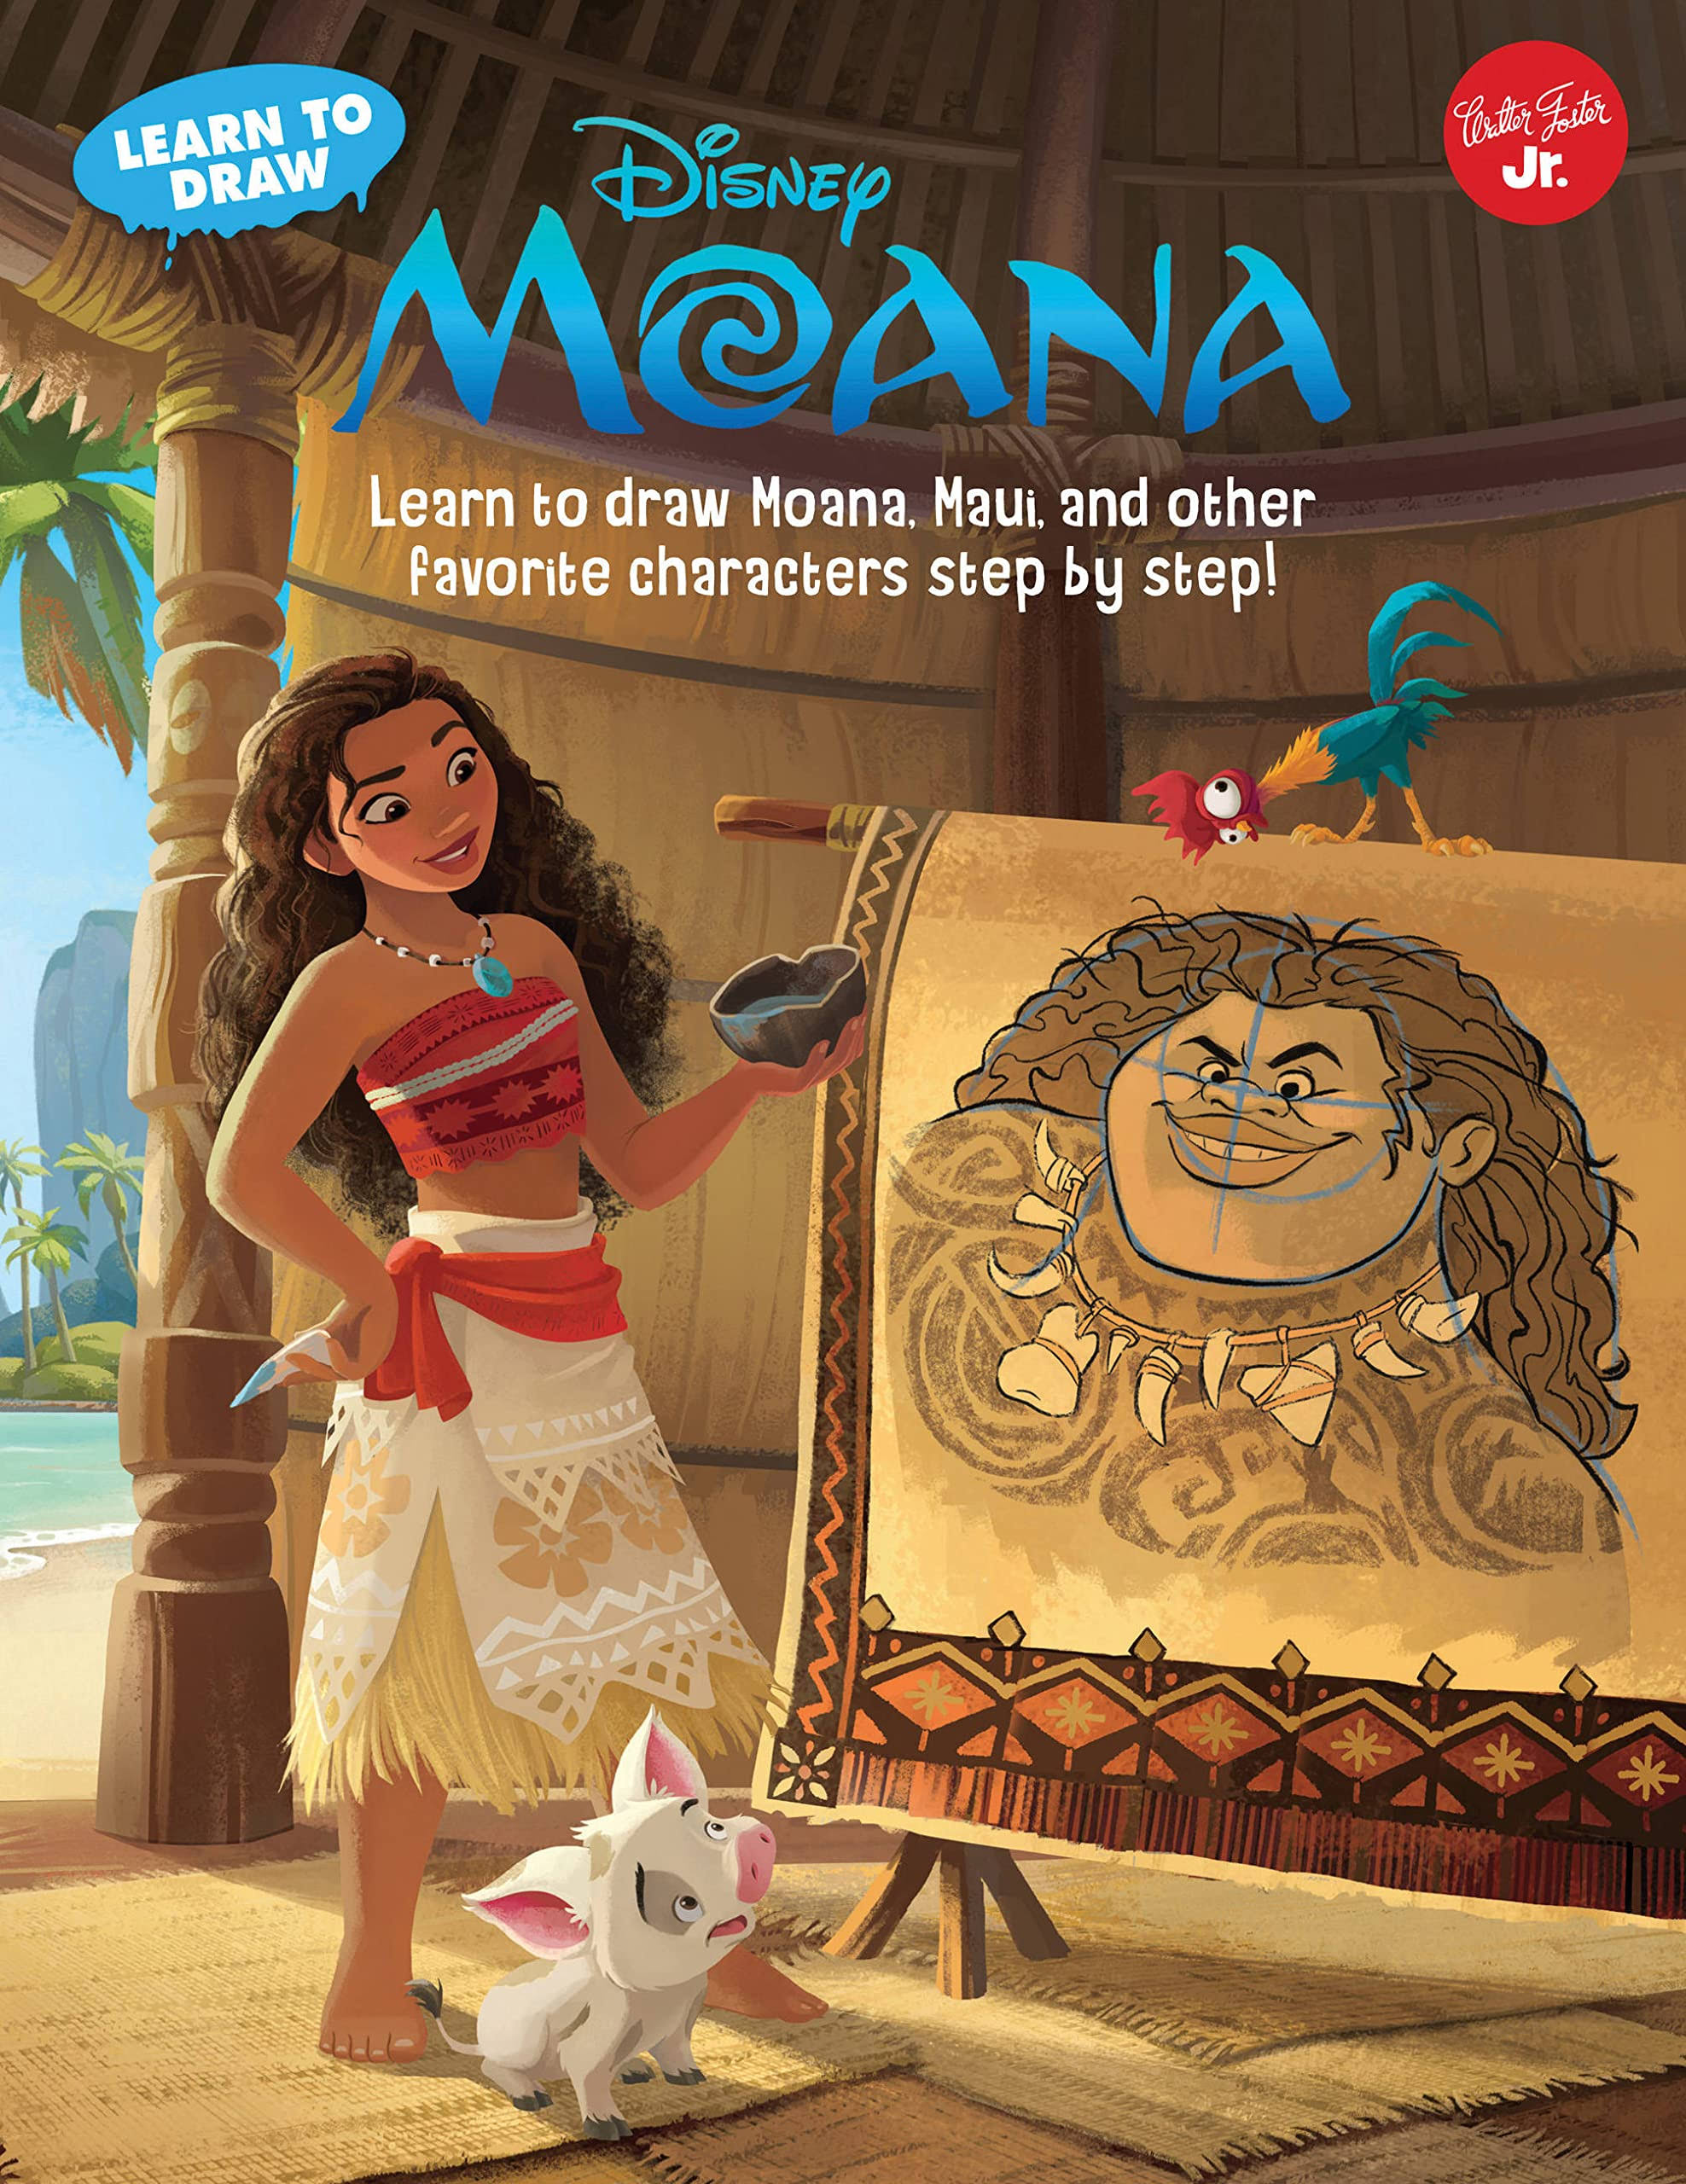 Learn to Draw Disney's Moana: Learn to Draw Moana, Maui, and Other Favorite Characters Step by Step! [Book]